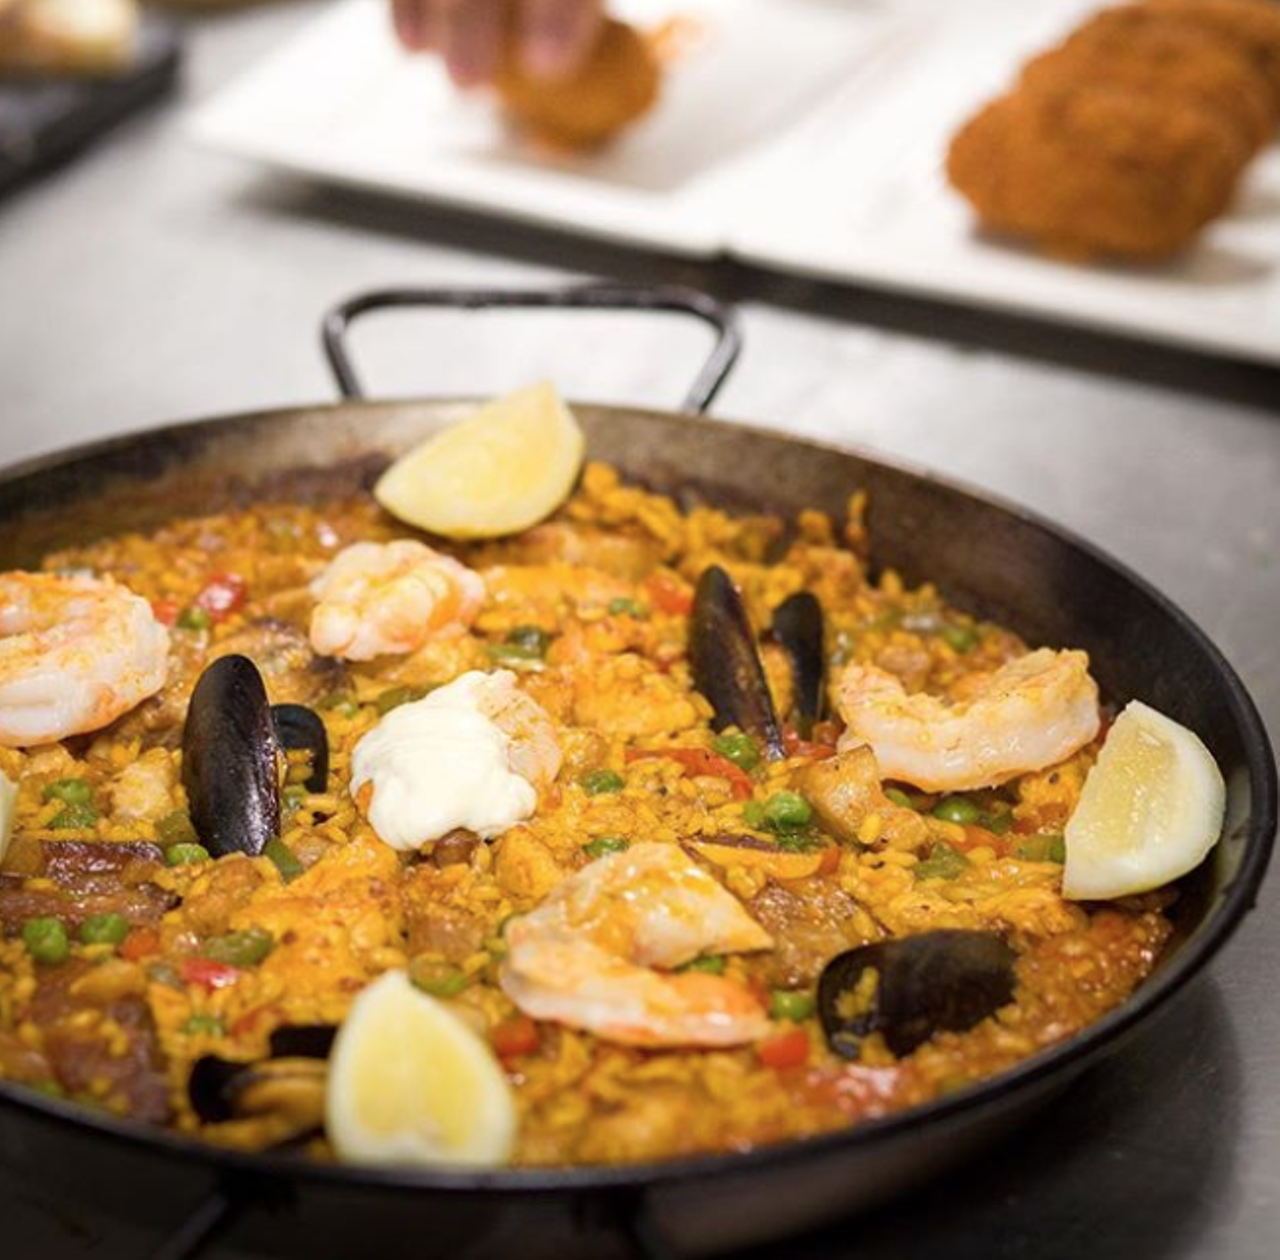 Toro Kitchen + Bar
115 N. Loop 1604 E., Suite 1105, (210) 592-1075, facebook.com
Two words: Toro Paella. The house special with shrimp, chicken, calamaria and Spanish chorizo is available for lunch and dinner during Restaurant Week. 
Photo via Instagram / torokitchenandbar